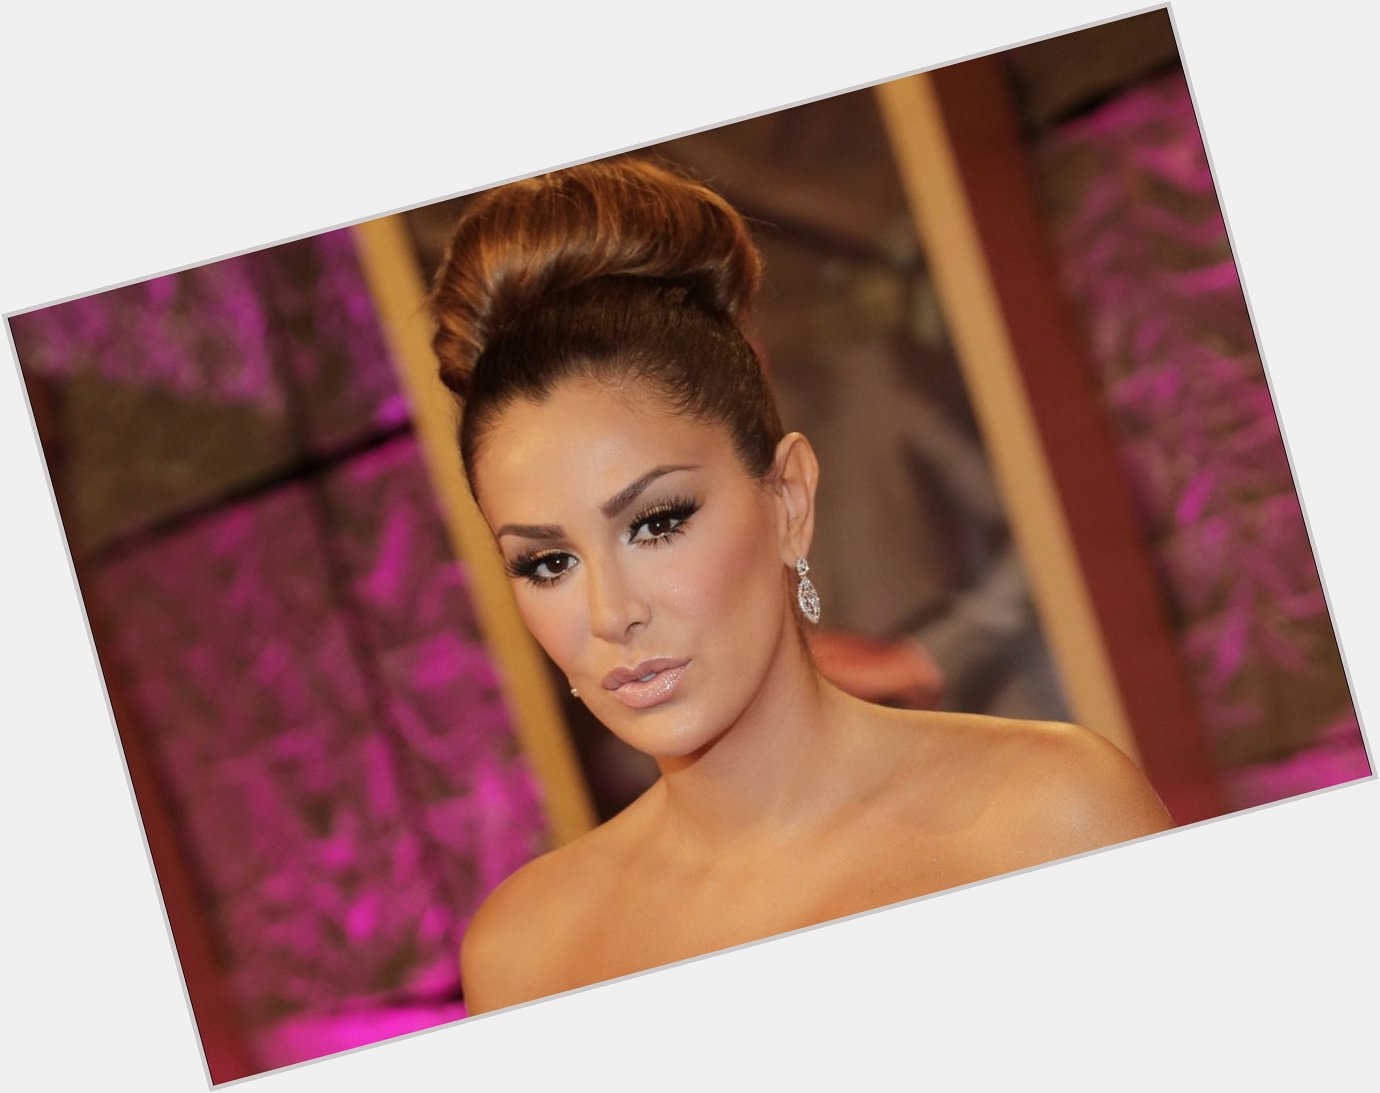   wishes Ninel Conde, a very happy birthday   